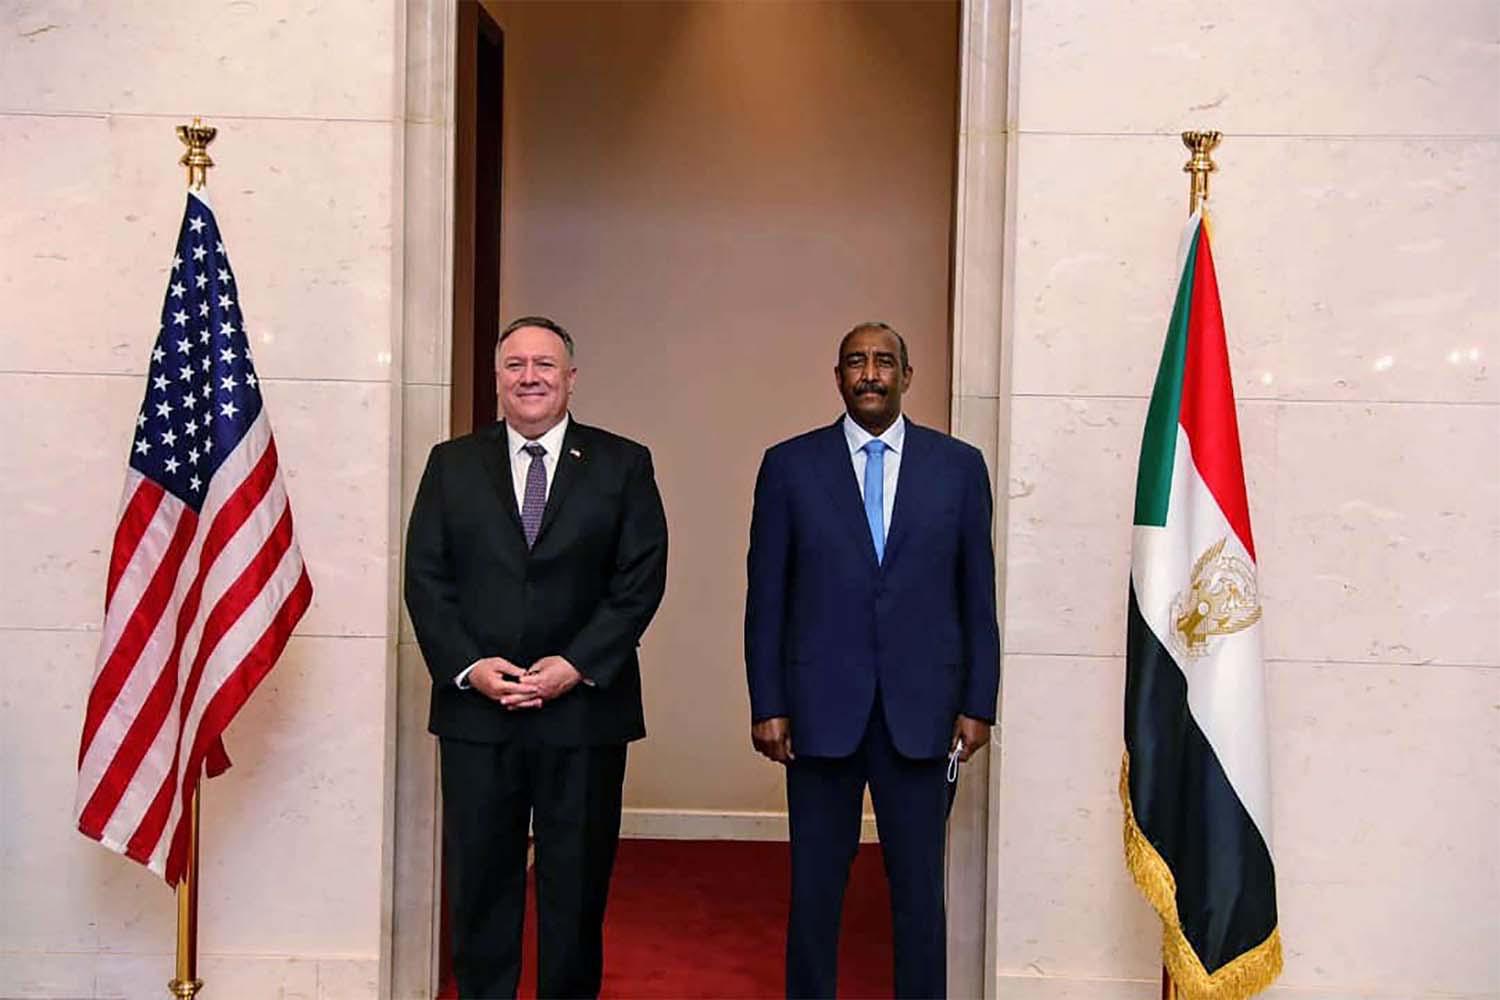 US Secretary of State Mike Pompeo stands with Sudanese Gen. Abdel-Fattah Burhan, the head of the ruling sovereign council